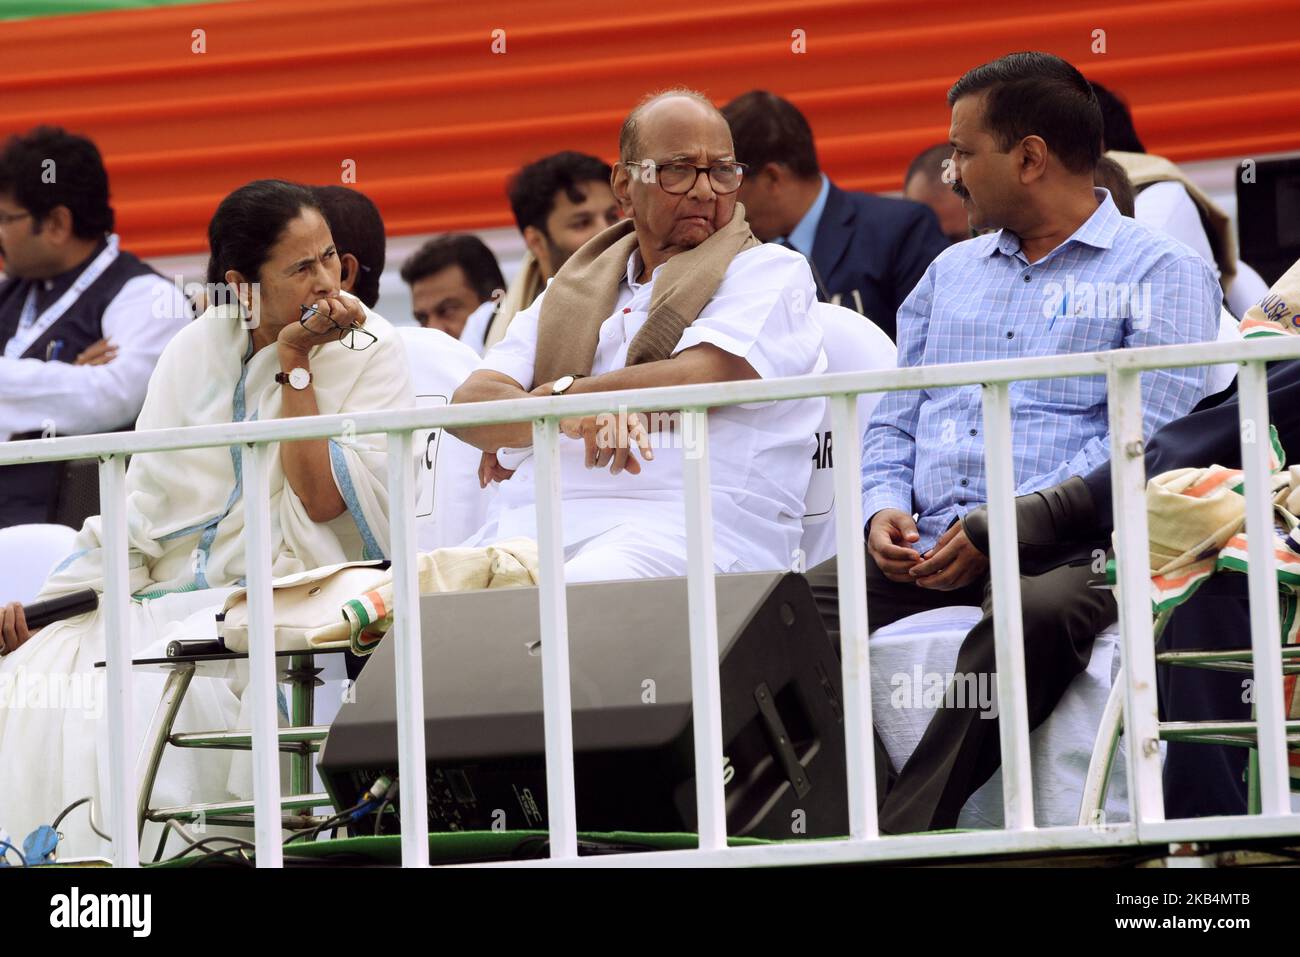 Left Side to AITMC Chief and Bengal CM Mamata Banerjee,NCP chief Sharad Pawar and Delhi CM Arvind Kejriwal during a rally attended by leaders from major Indian opposition parties in Kolkata, India, Saturday, Jan. 19, 2019. The rally has been attended by the leaders of twenty-two national and regional parties who oppose the ruling Bharatiya Janata Party (BJP) government. (Photo by Debajyoti Chakraborty/NurPhoto) Stock Photo